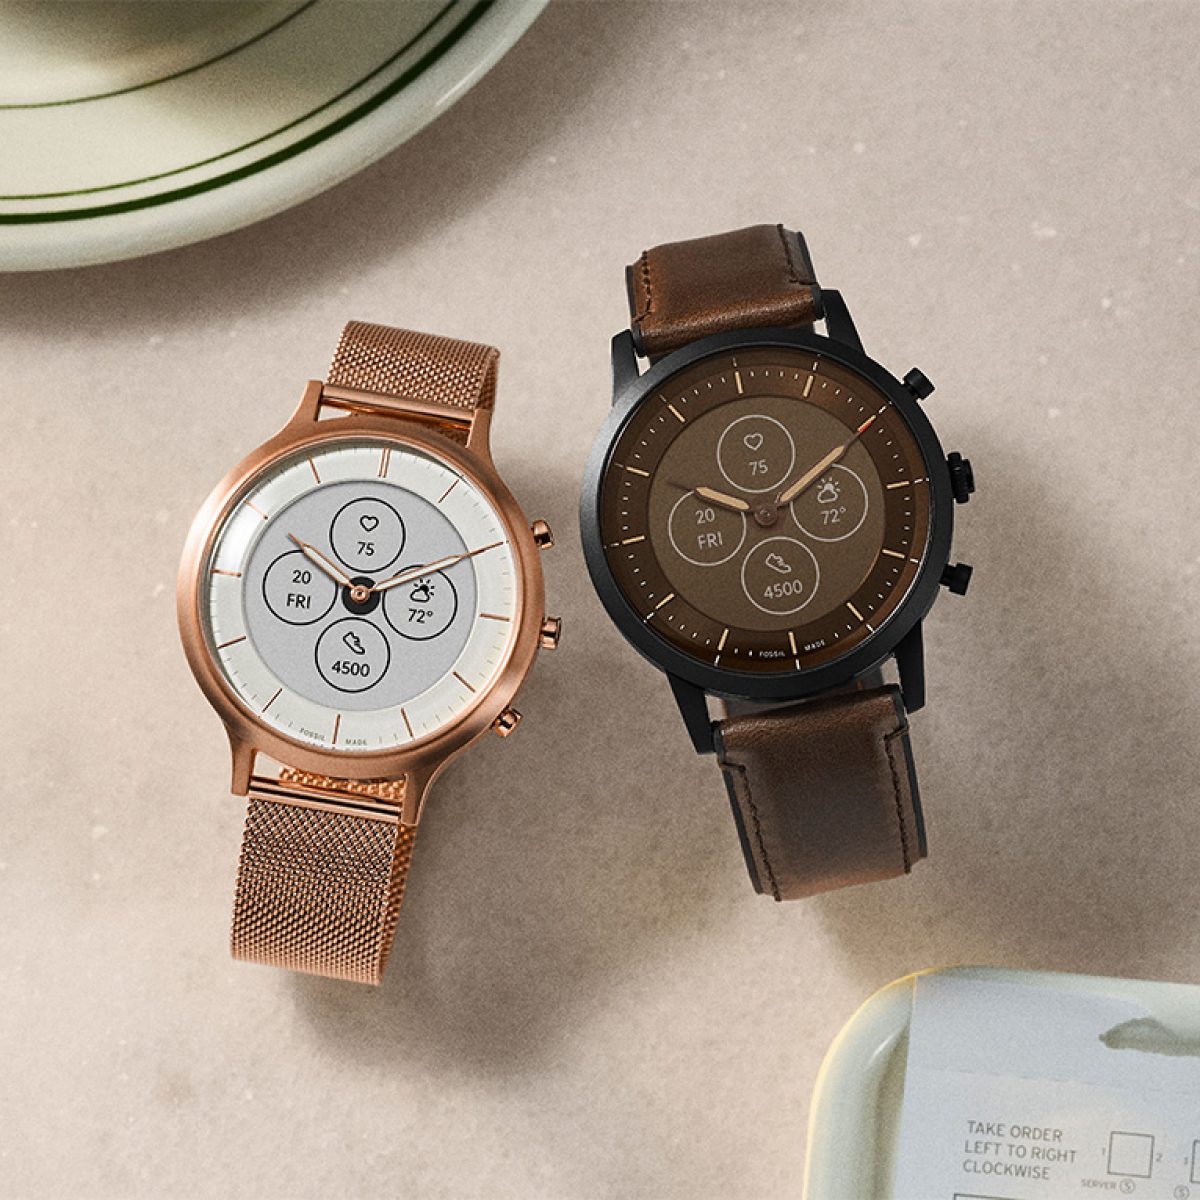 Fossil Announces Previously Spotted Hybrid HR Platform and Watches,  Starting at $195